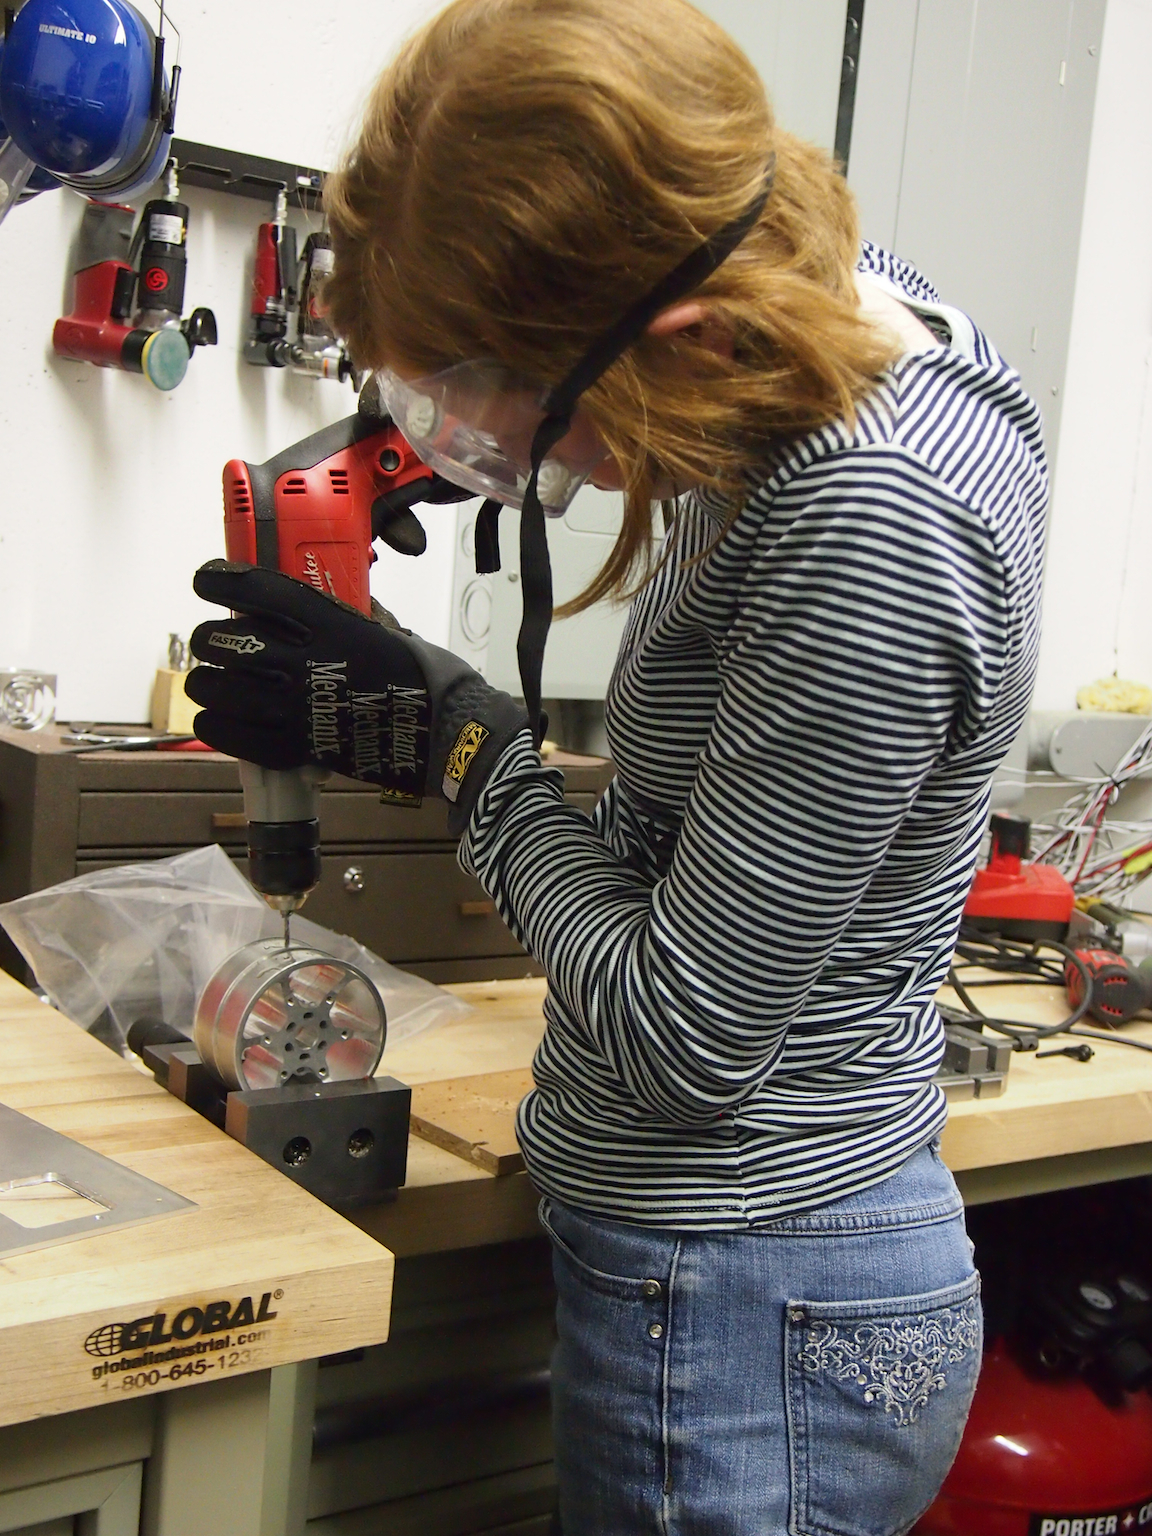 A new skill: Camille uses our largest Milwaukee hand drill to tap 6-32 threads into the metal wheels. The threaded holes will be used to secure the tread to the wheel (we don't like glue).